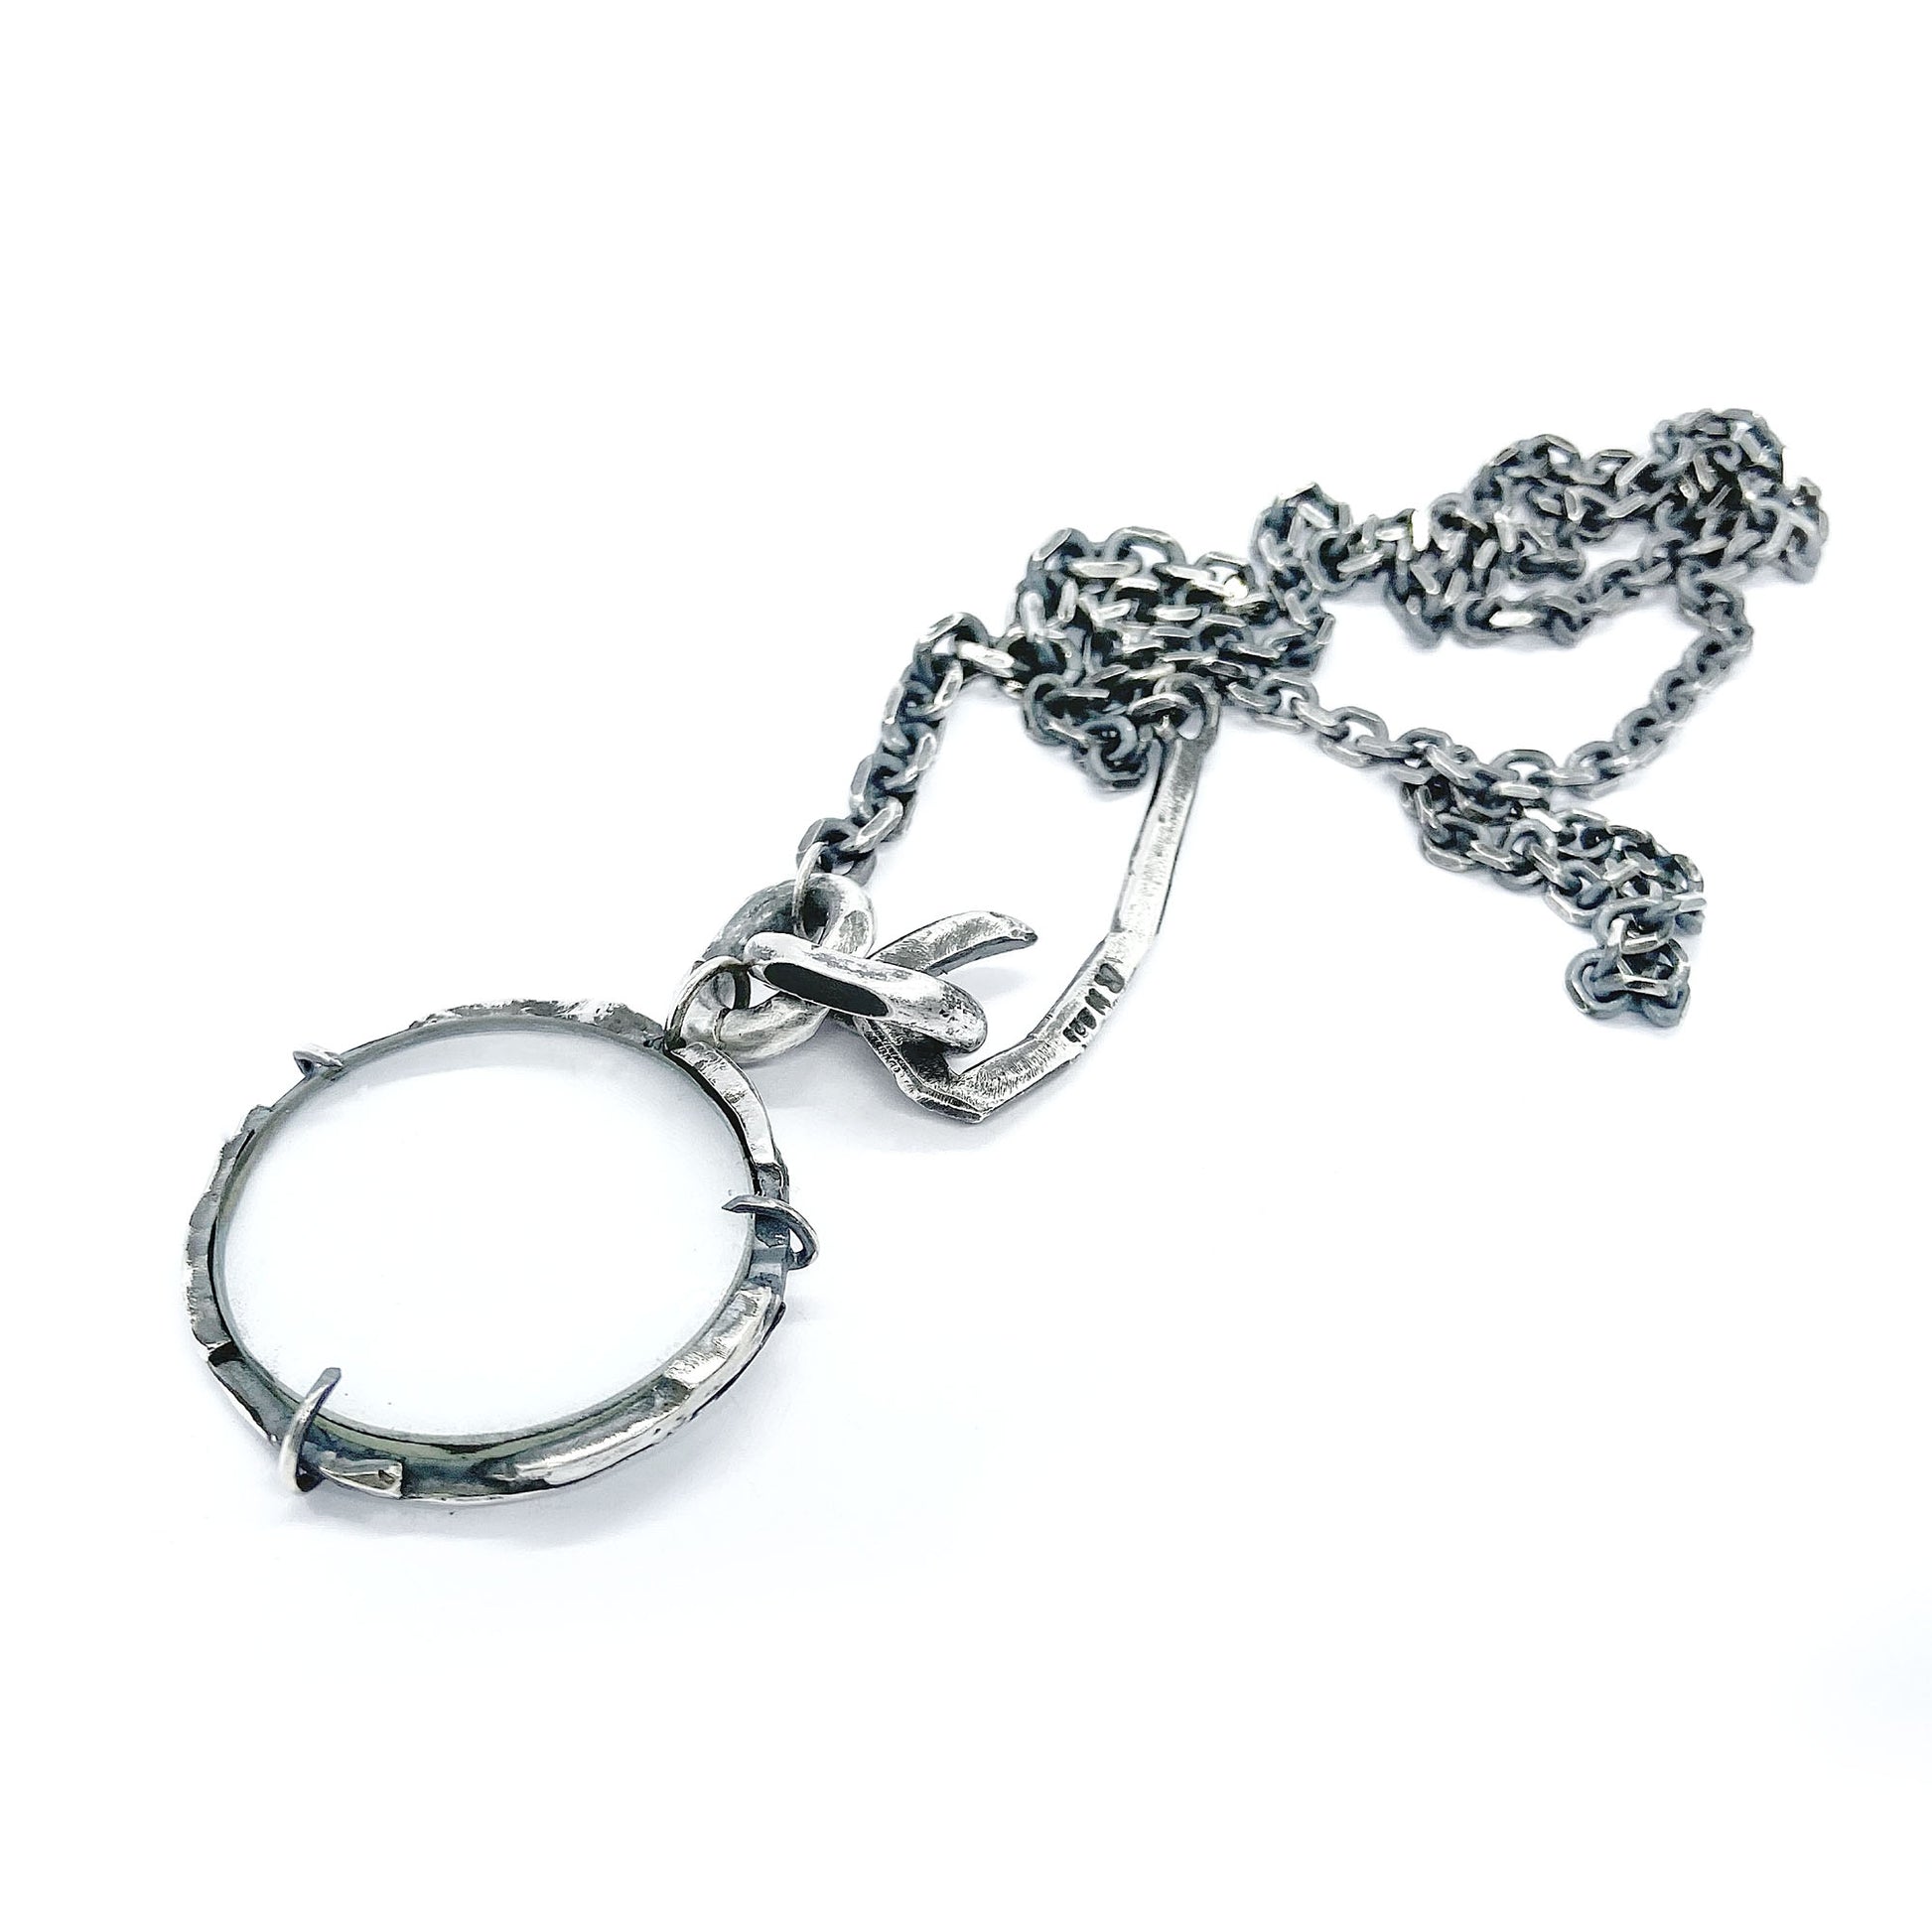 Magnifying glass silver pendant